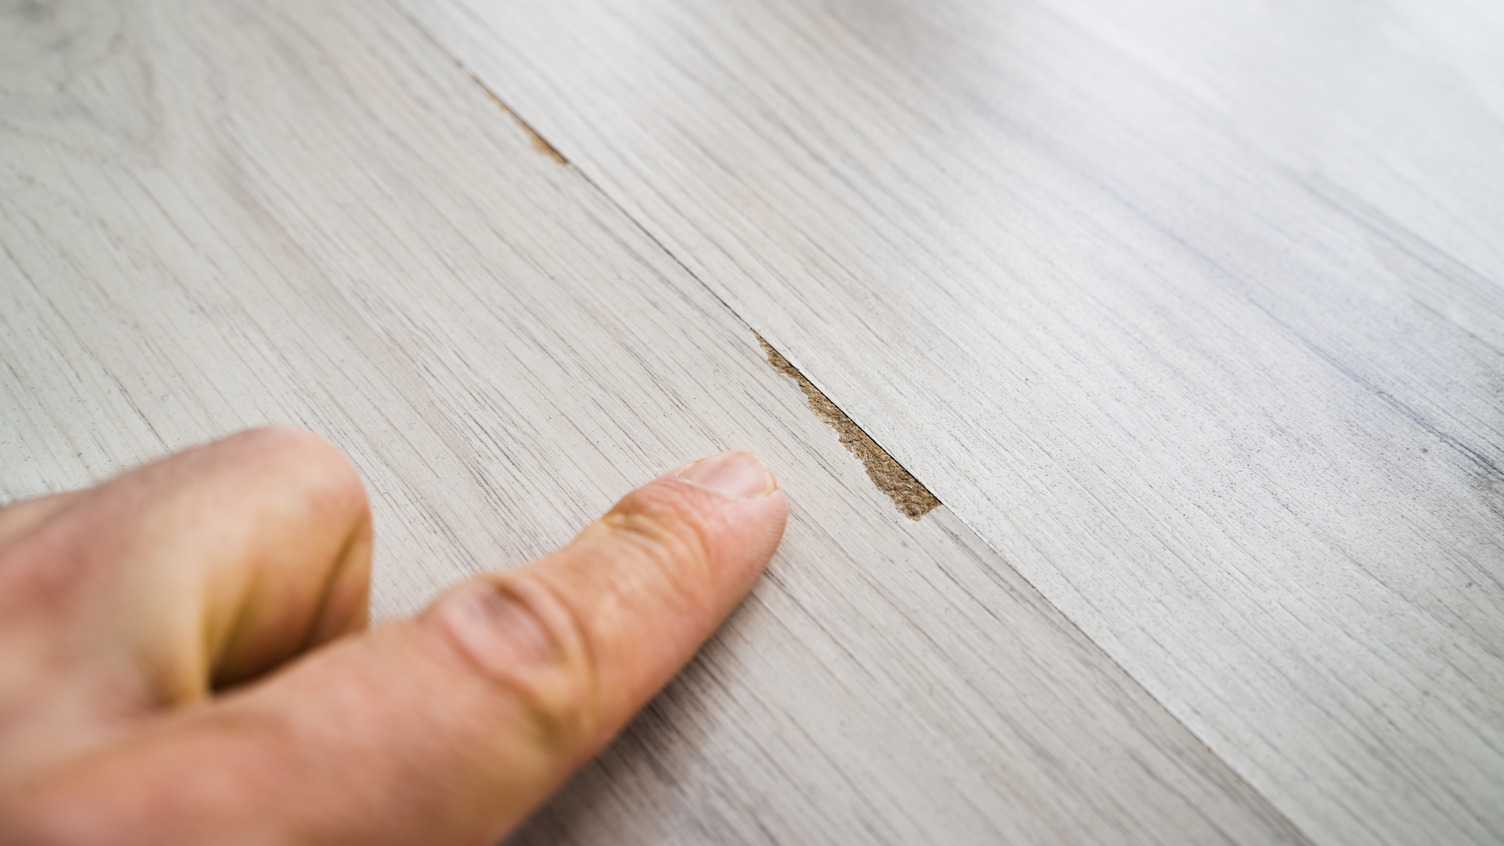 Person pointing out chipped part of wood floor